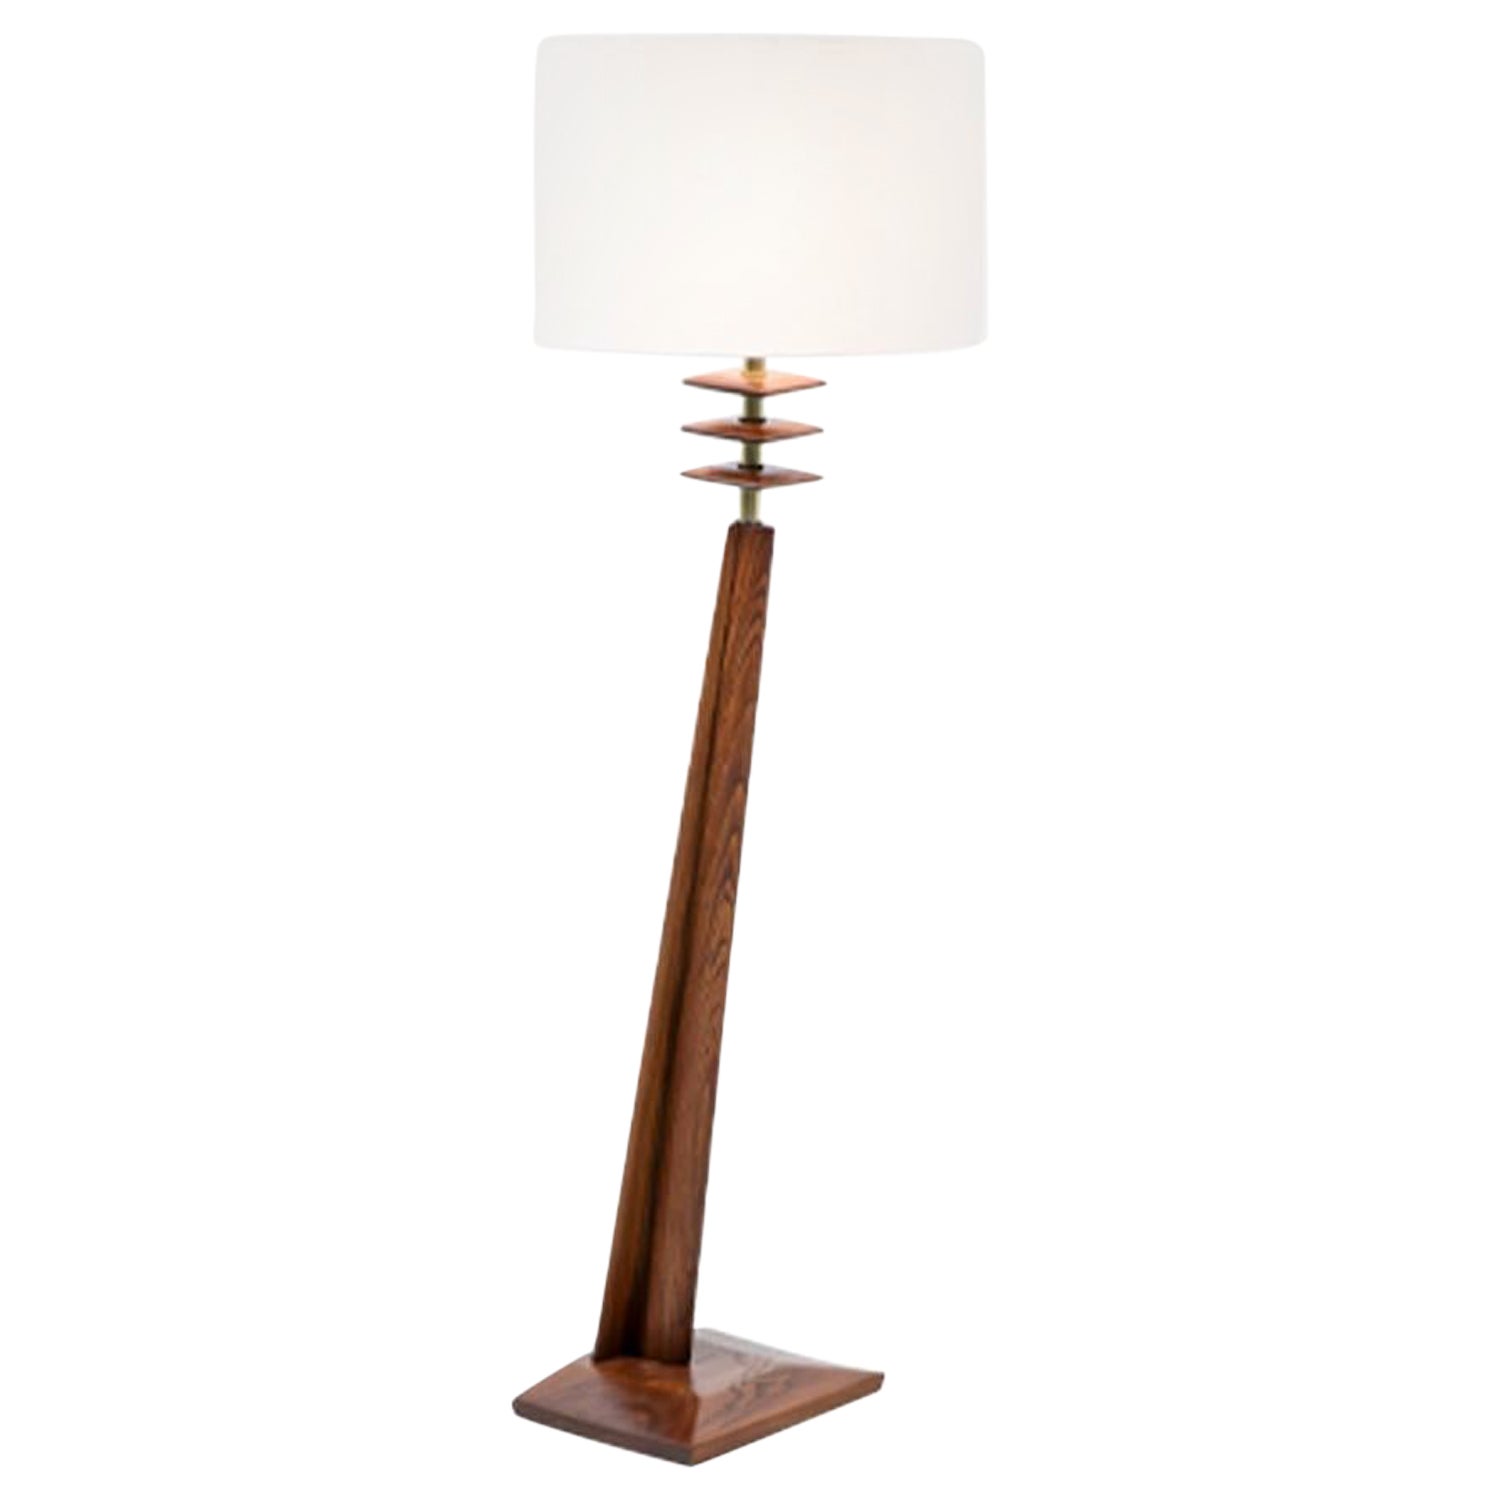  Expertly Restored - Mid-Century Modern Sculpted Floor Lamp with Brass Accents